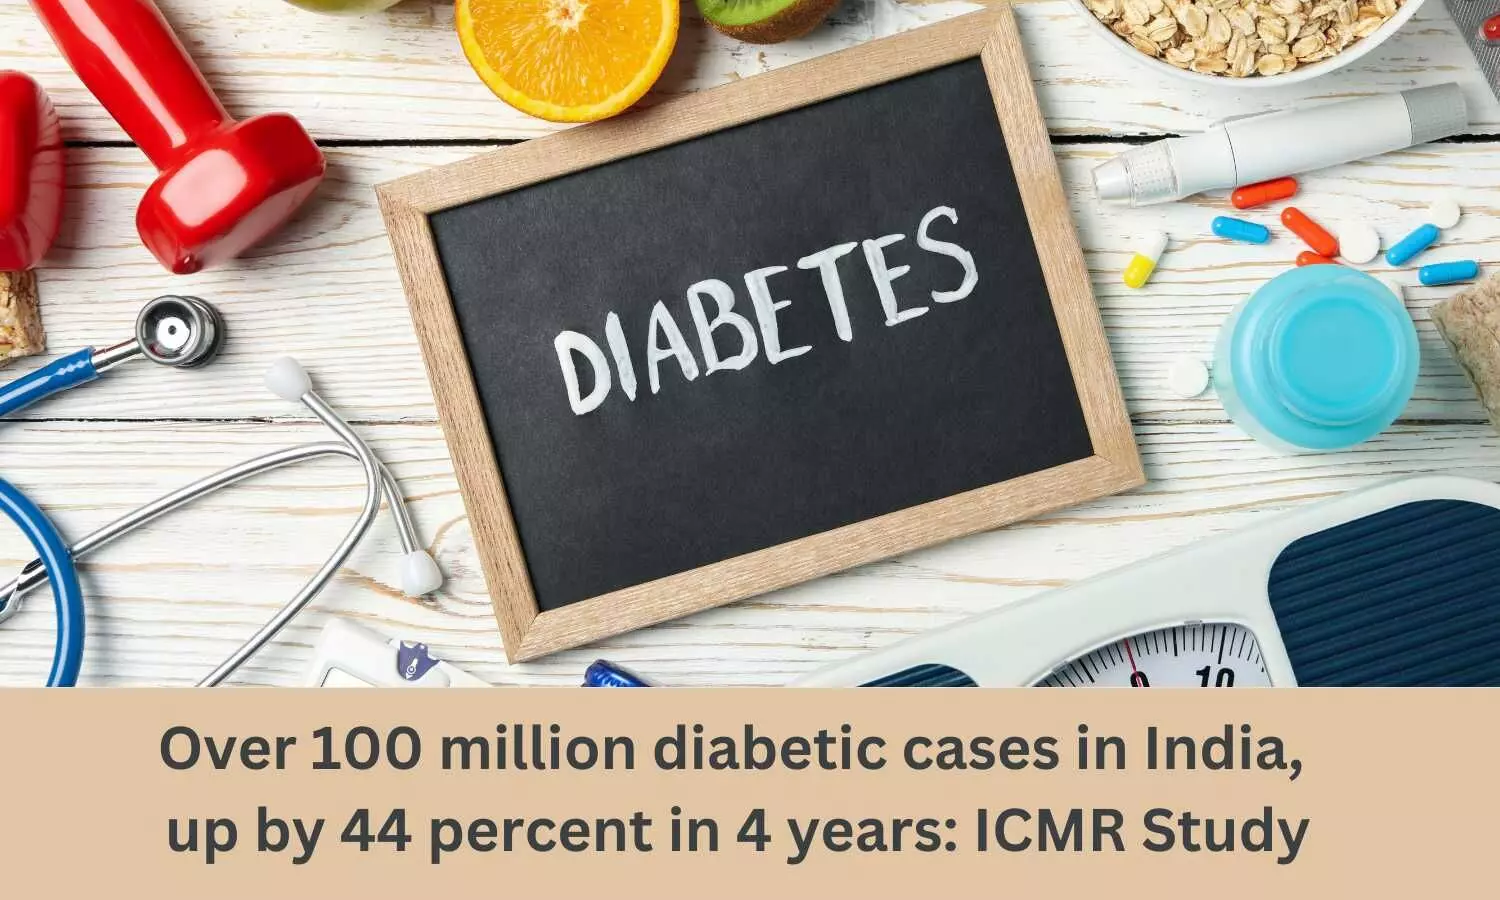 Over 100 million diabetic cases in India, up by 44 percent in 4 Years: ICMR Study